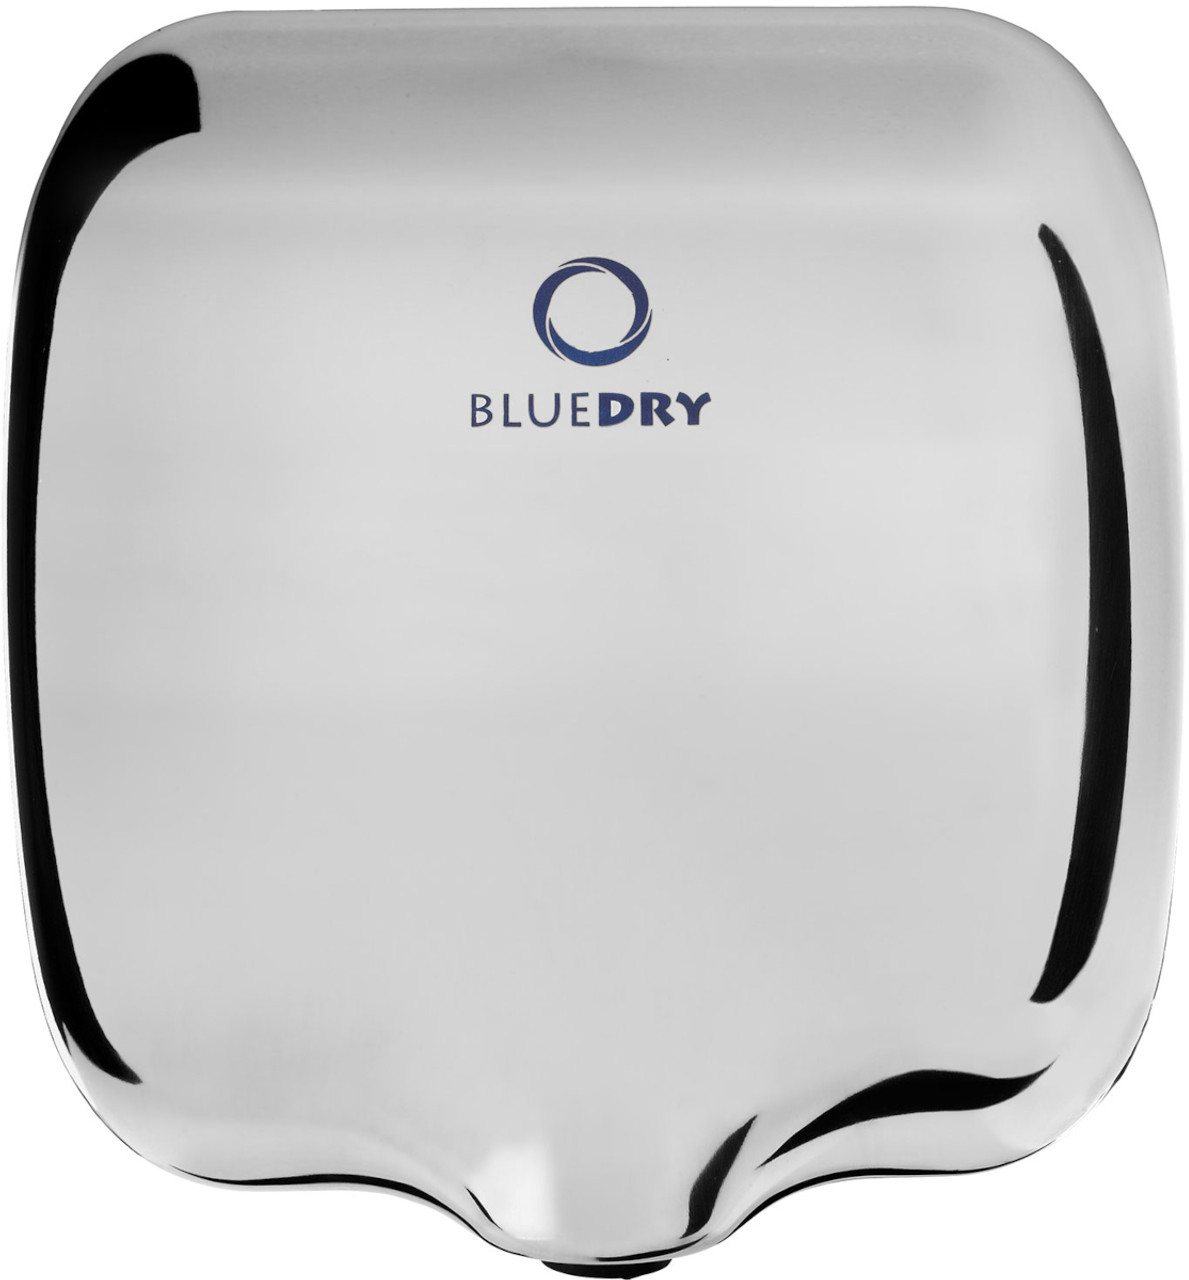 HD-BD1000PS - BlueDry Eco Dry Hand Dryer - Polished Stainless Steel - Front